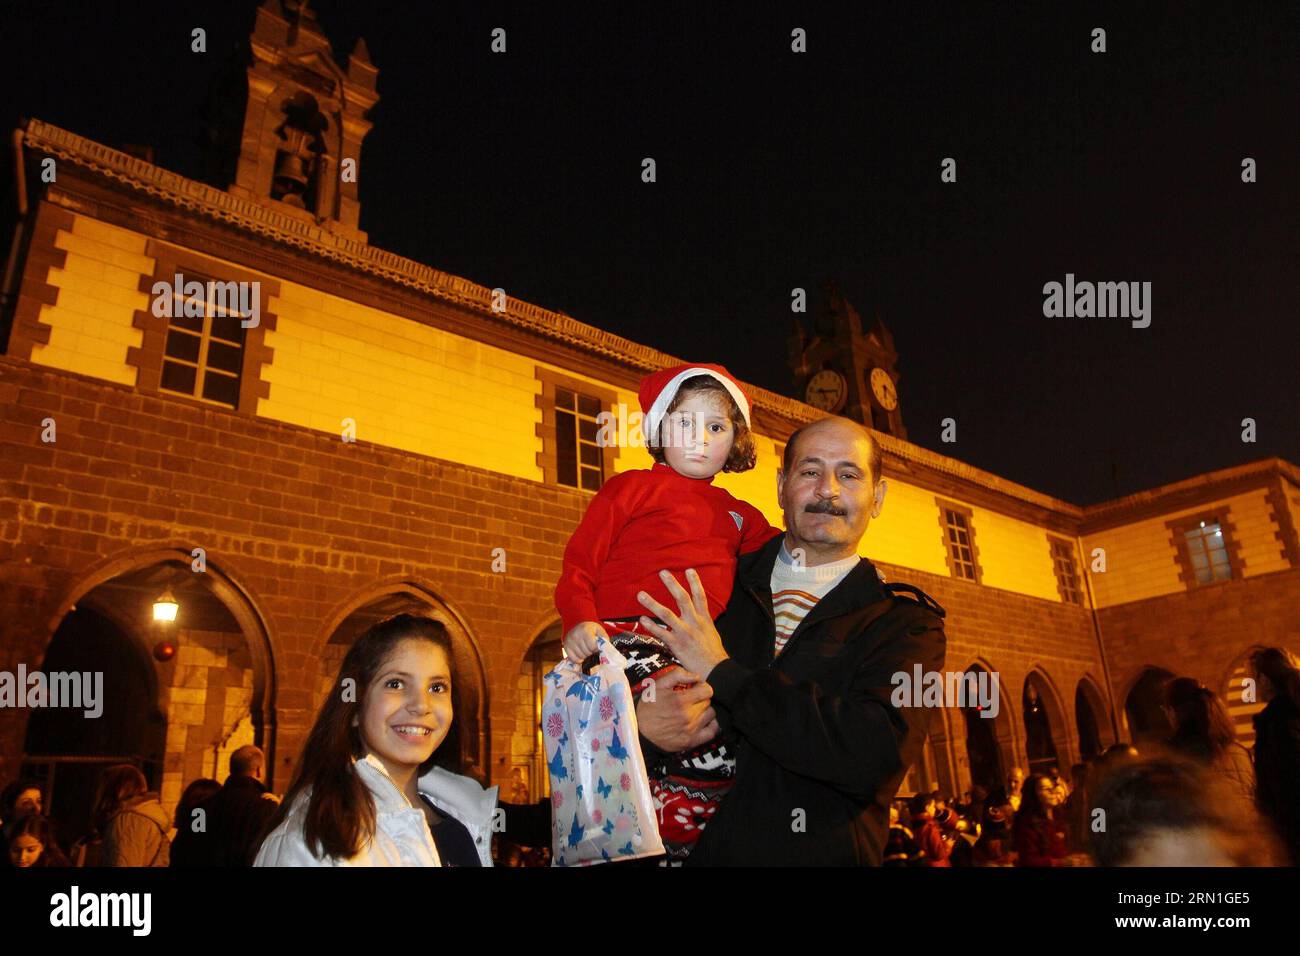 (141230) -- DAMASCUS, Dec. 30, 2014 -- People attend the Christmas celebration at al-Zaitoun Cathedral in Damascus, capital of Syria, on Dec. 30, 2014. About 1,500 Syrian Christian kids and their parents gathered at al-Zaitoun Cathedral in Syria s capital Damascus to take part in a Christmas celebration. About 10 percent of population in Syria are Christian, who suffered persecution in some parts of the country by the hands of the extremist groups. )(zhf) SYRIA-DAMASCUS-CHRISTIAN-CHRISTMAS CELEBRATION bassemxtellawi PUBLICATIONxNOTxINxCHN   Damascus DEC 30 2014 Celebrities attend The Christmas Stock Photo